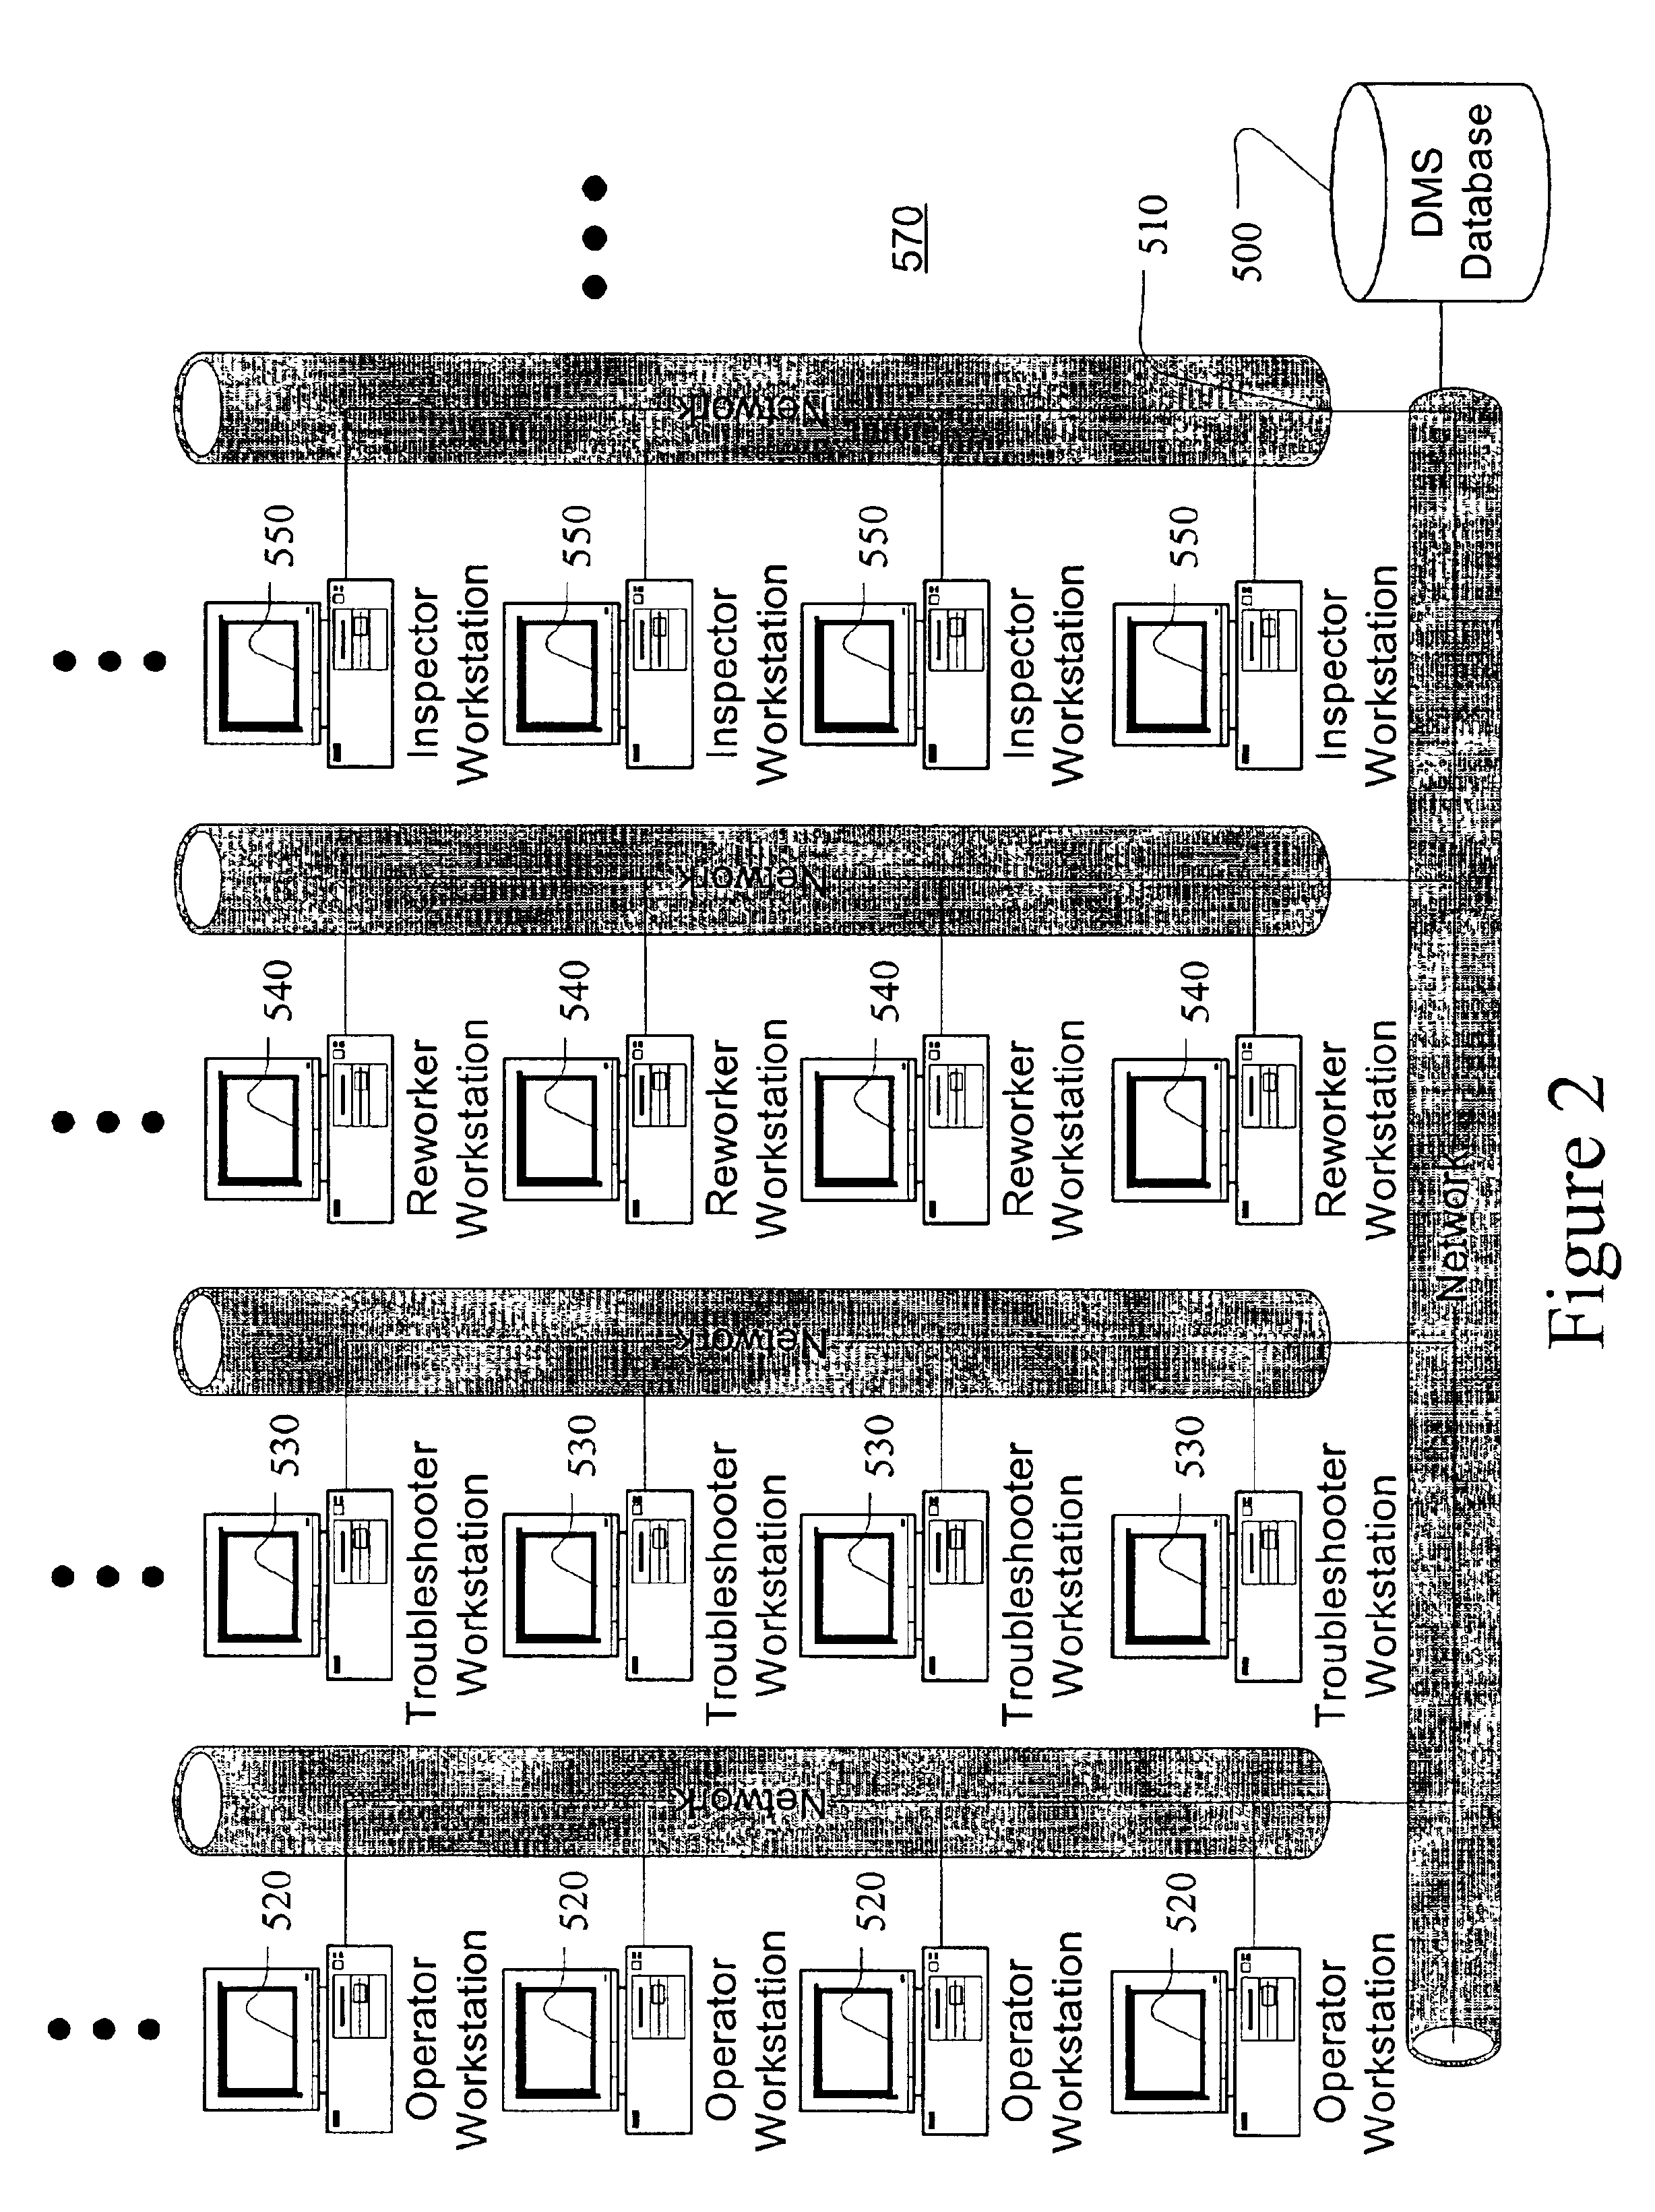 Method of improving quality of manufactured modules